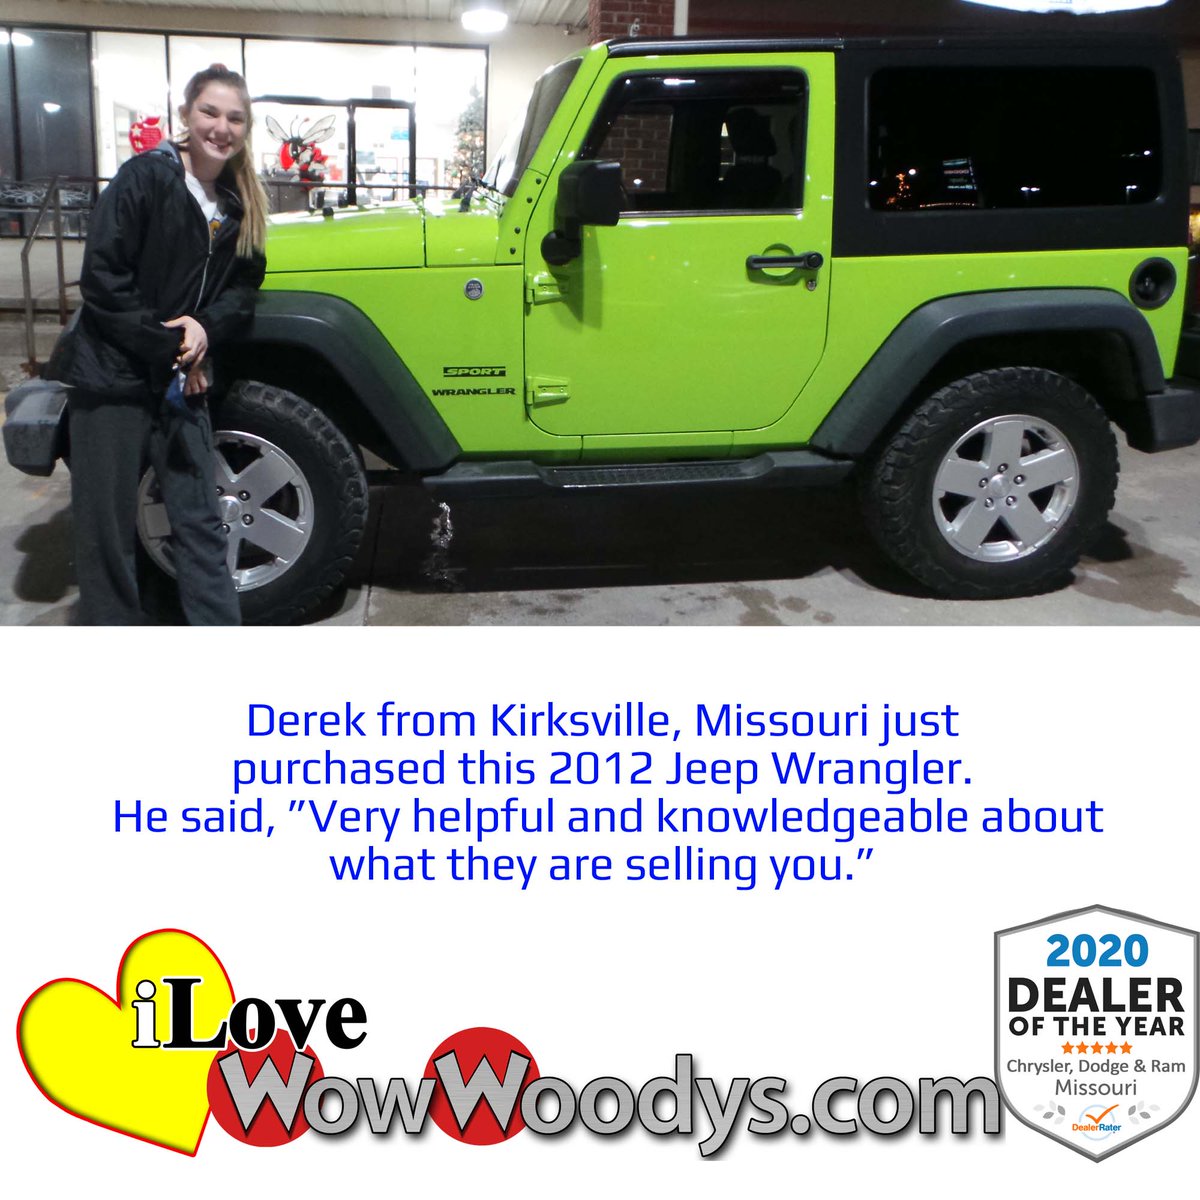 Derek just purchased this bright Jeep Wrangler! 💚 Congratulations!  Wrangler at wowcarbuying.com/wrangler!
 #jeep #jeeps #jeepwrangler  #jeeplife #jeepgirl #jeepwave #jeepsofinsta #jeepsofinstagram #jeepmafia #jeepnation #jeeplove #jeepthing #jeepwranglersport